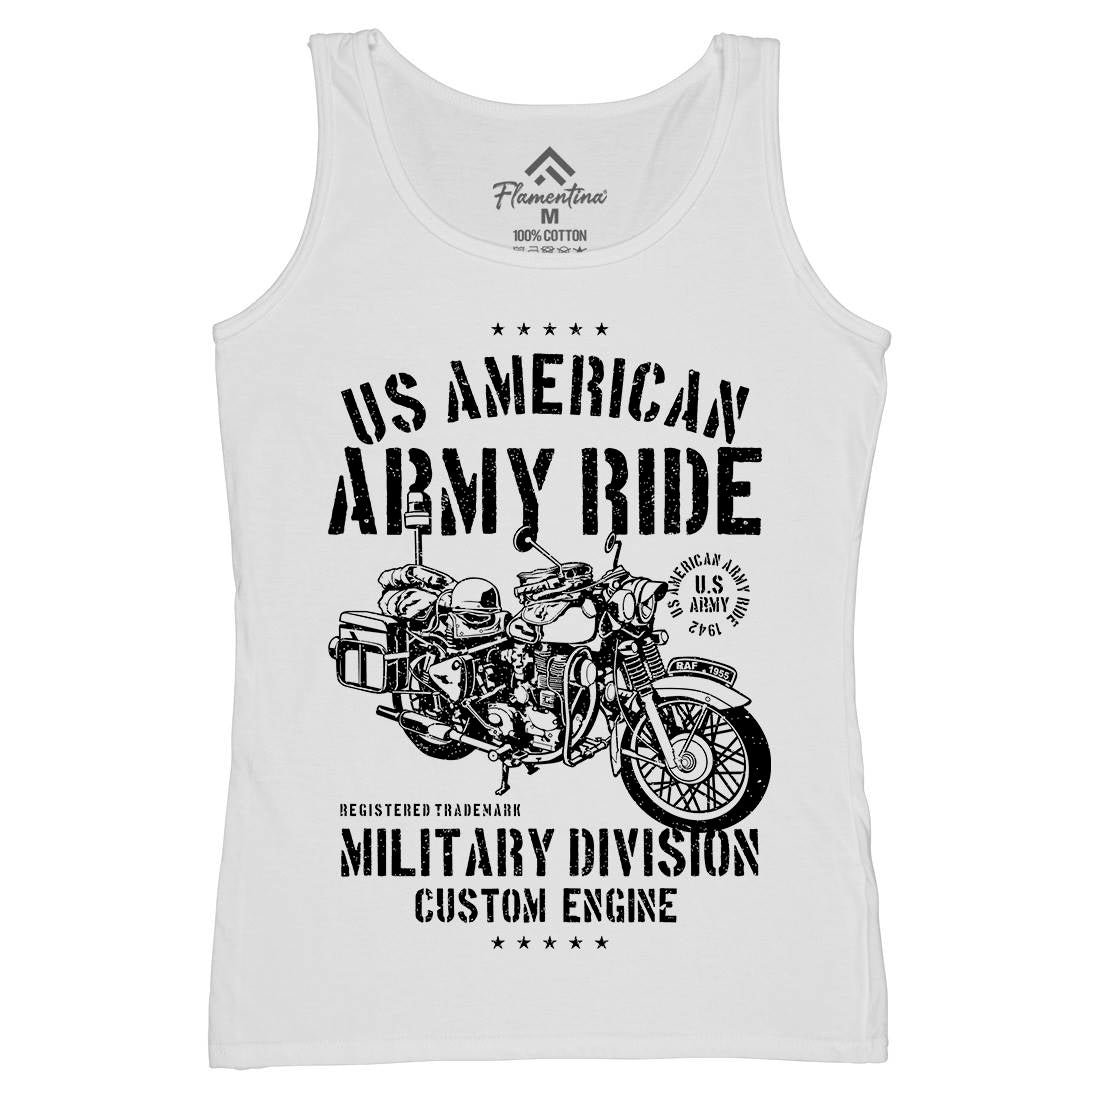 Ride Womens Organic Tank Top Vest Army A613